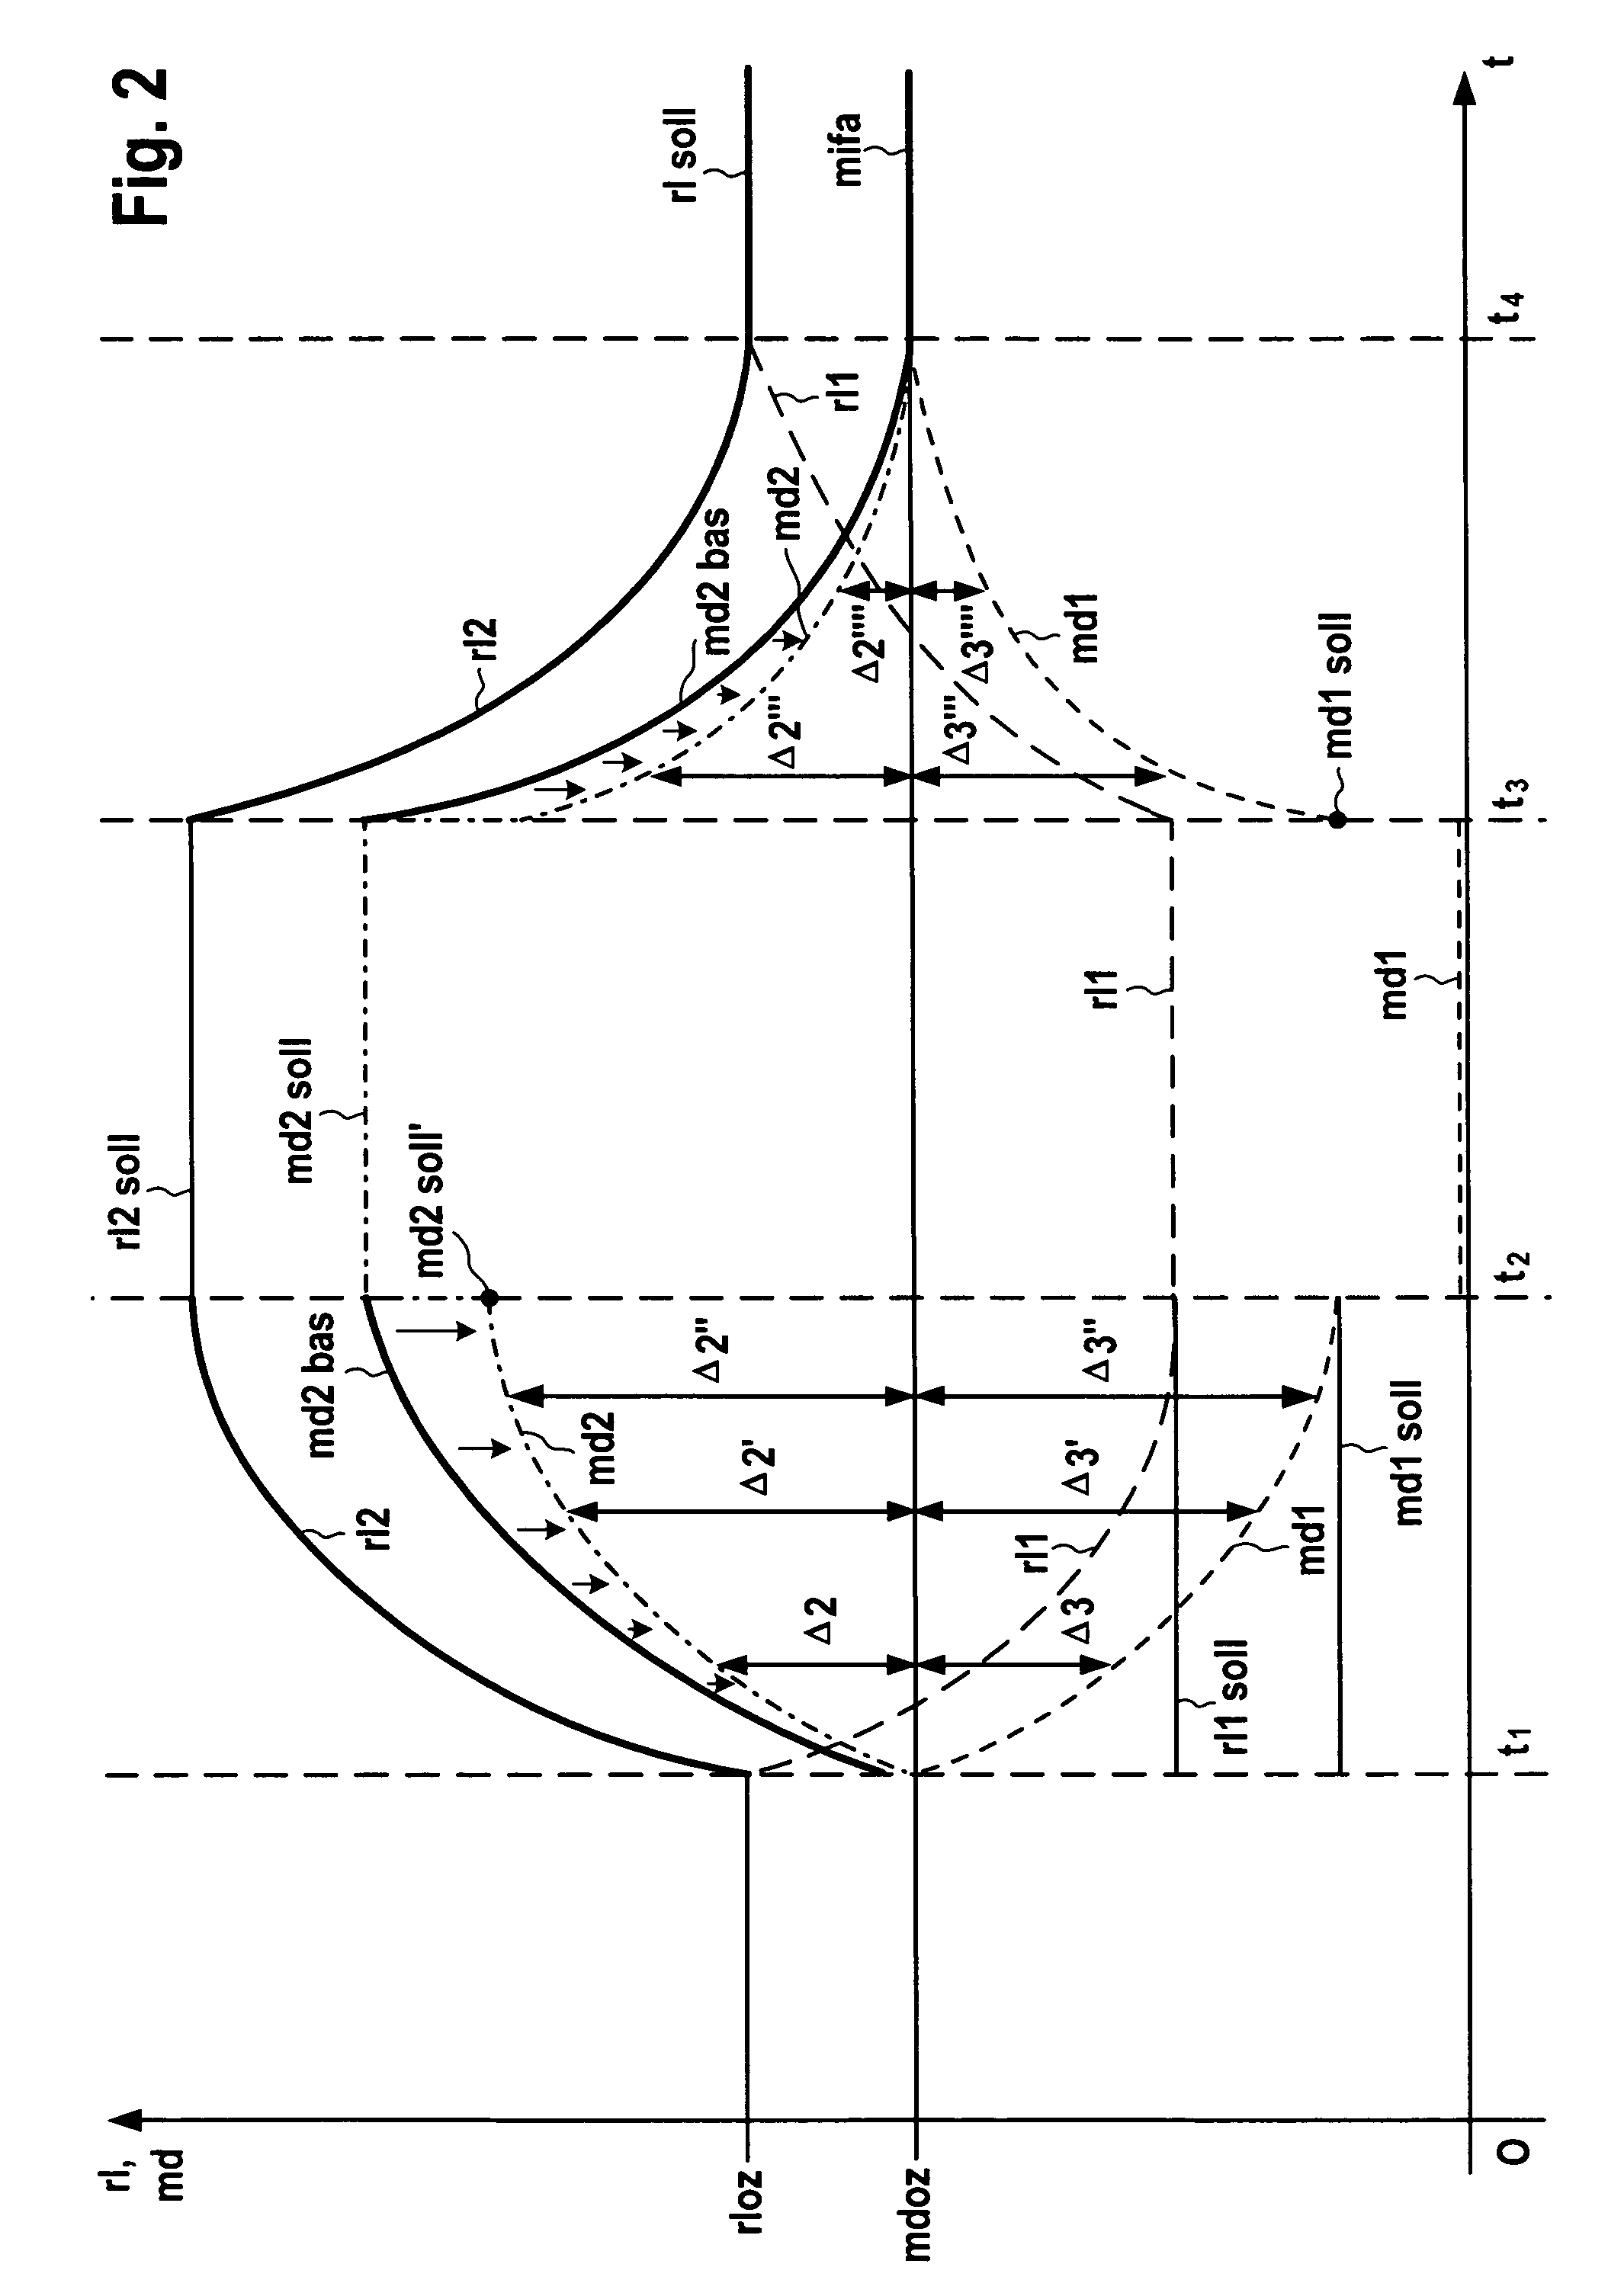 Method for operating an internal combustion engine having a plurality of cylinder banks